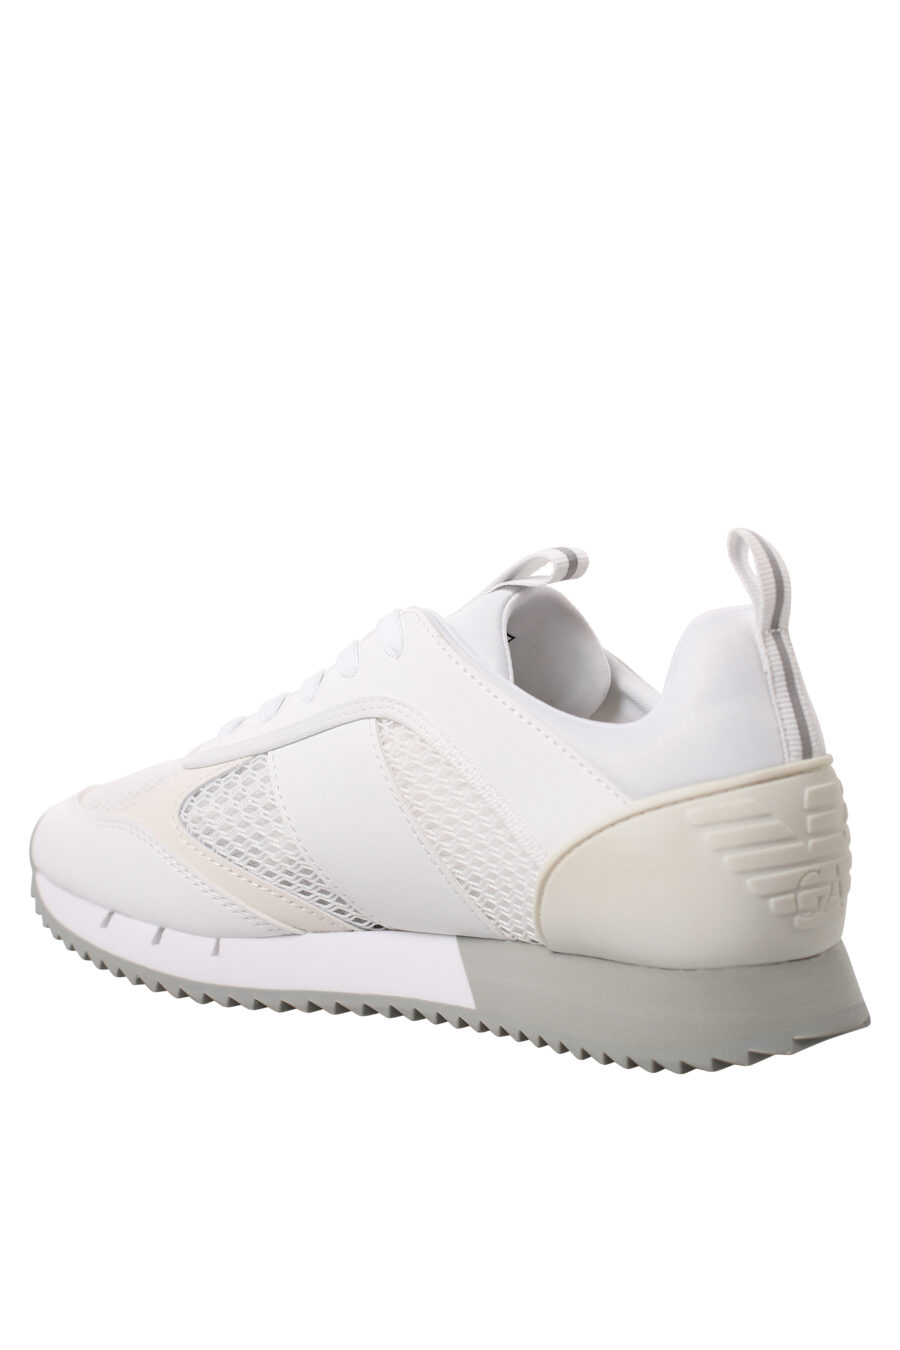 Breathable white trainers with gold "lux identity" logo and two-tone sole - IMG 1919 2